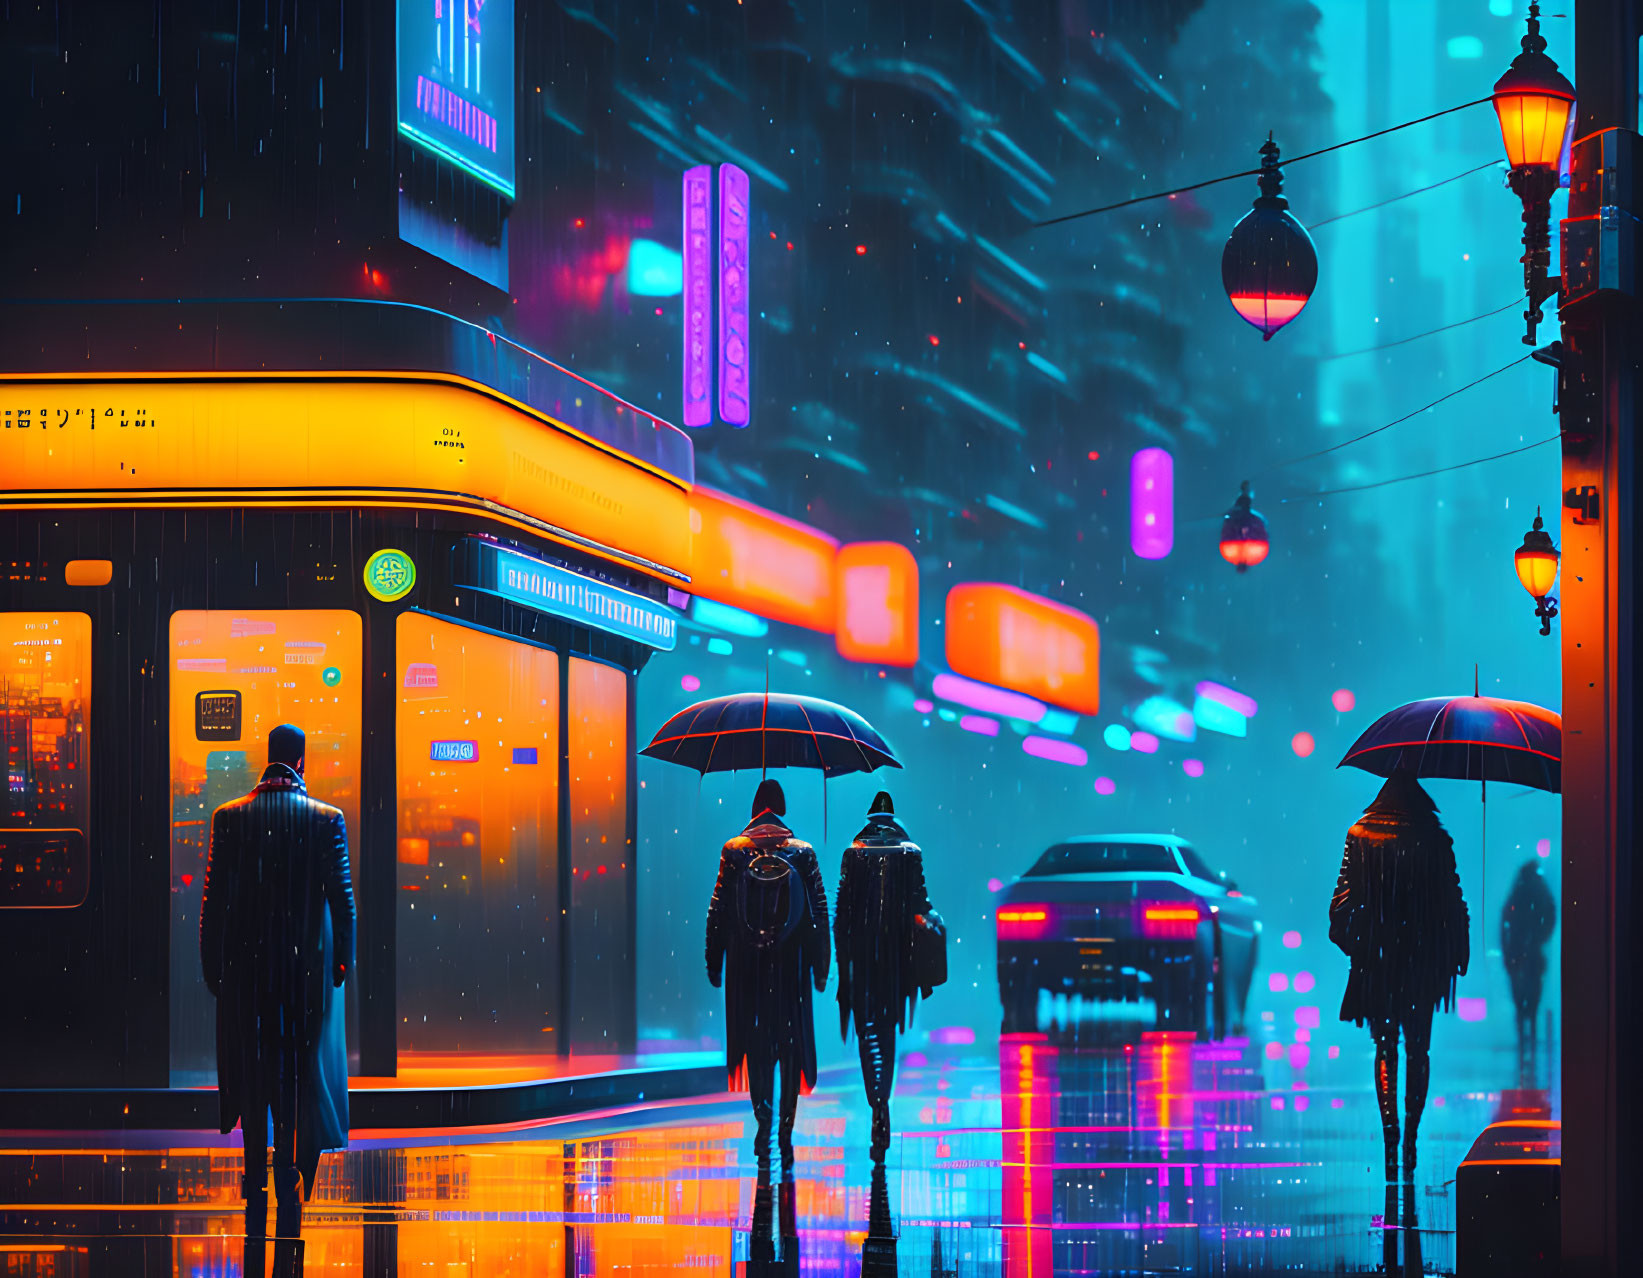 Futuristic city street at night with neon signs, tram, and rain reflections